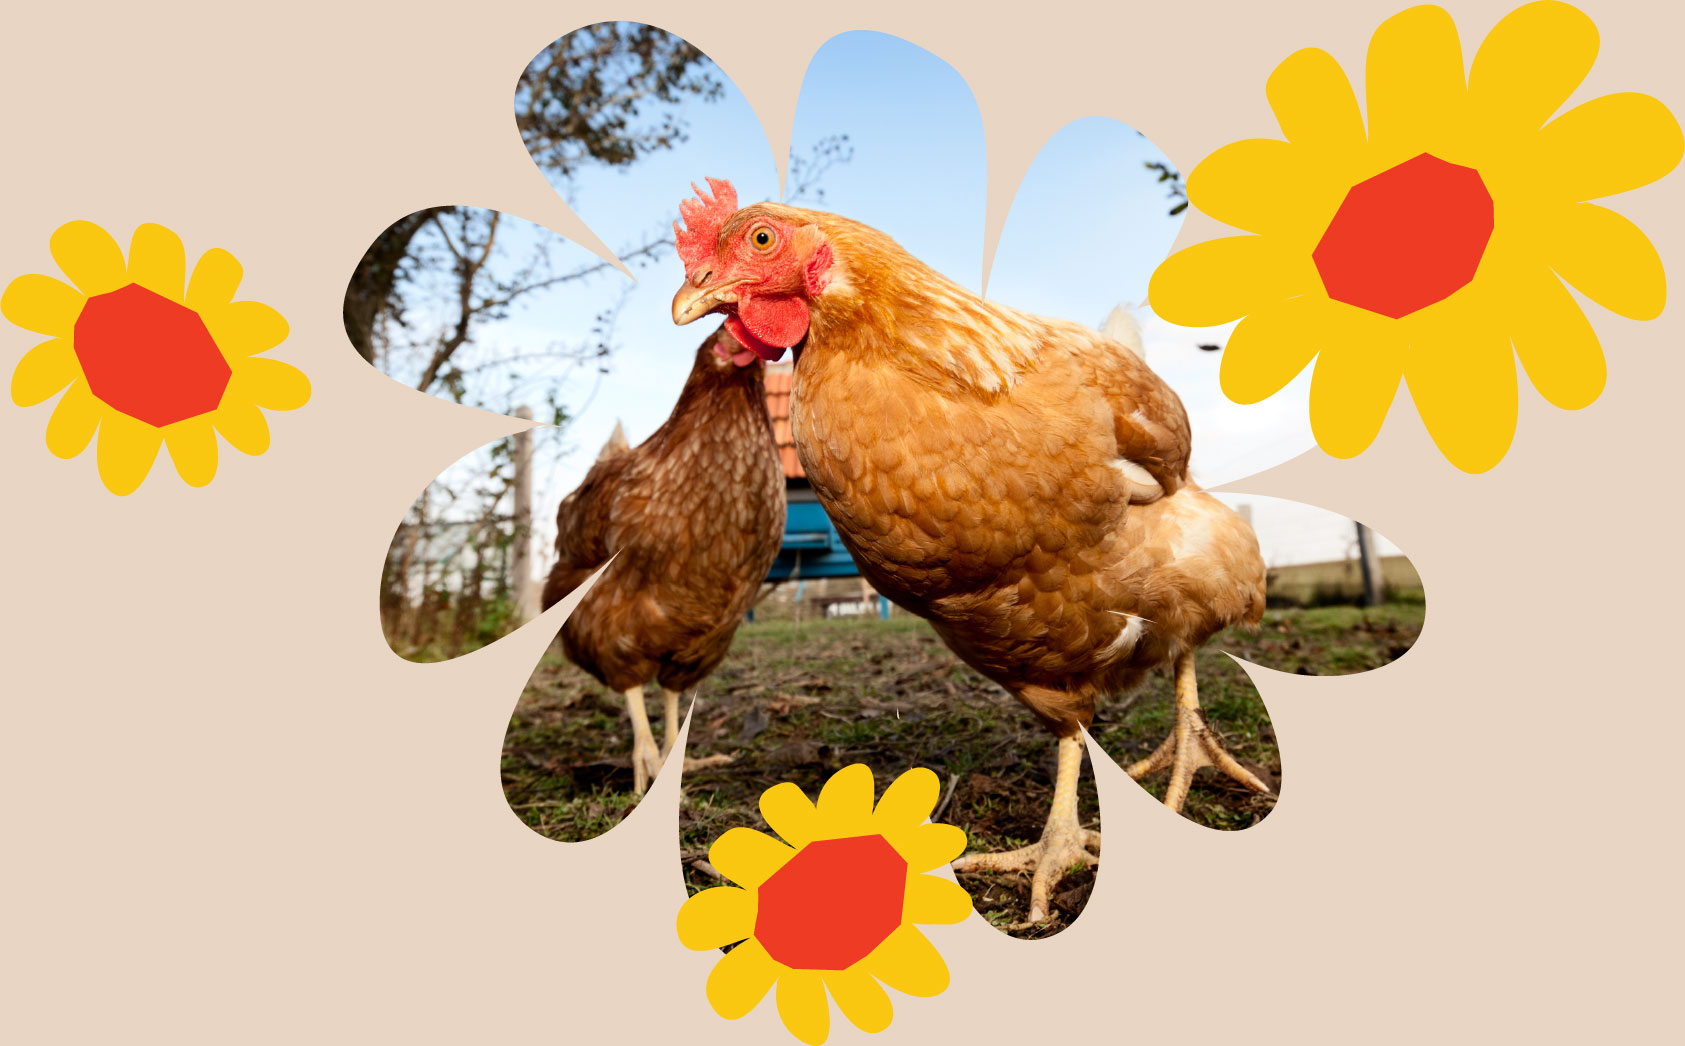 II. The Role of Hens in Soil Health